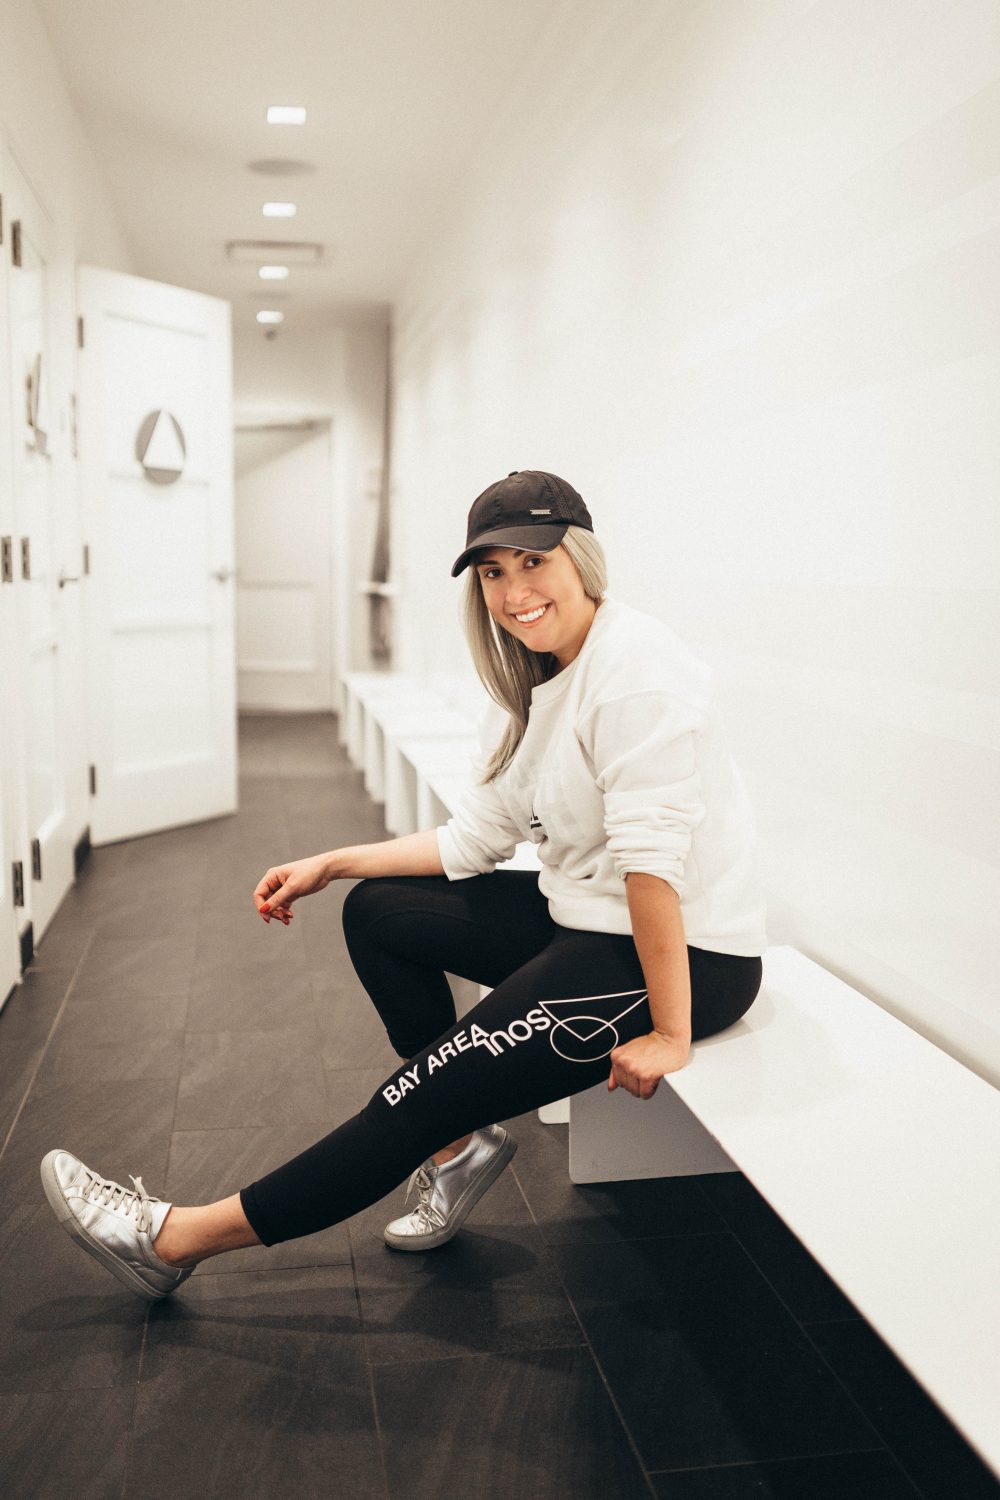 Sweat it out 2018, How I Found My Soul, SF Style, SF Fashion, SoulCycle, KatWalkSF, January Goals, Fitness Goals, New Years Resolution, SF Blogger, Top Blogger, Aviator Nation, Spin Class, Cycling, Is Soul Cycle Worth it?, Expensive Spin Class, 